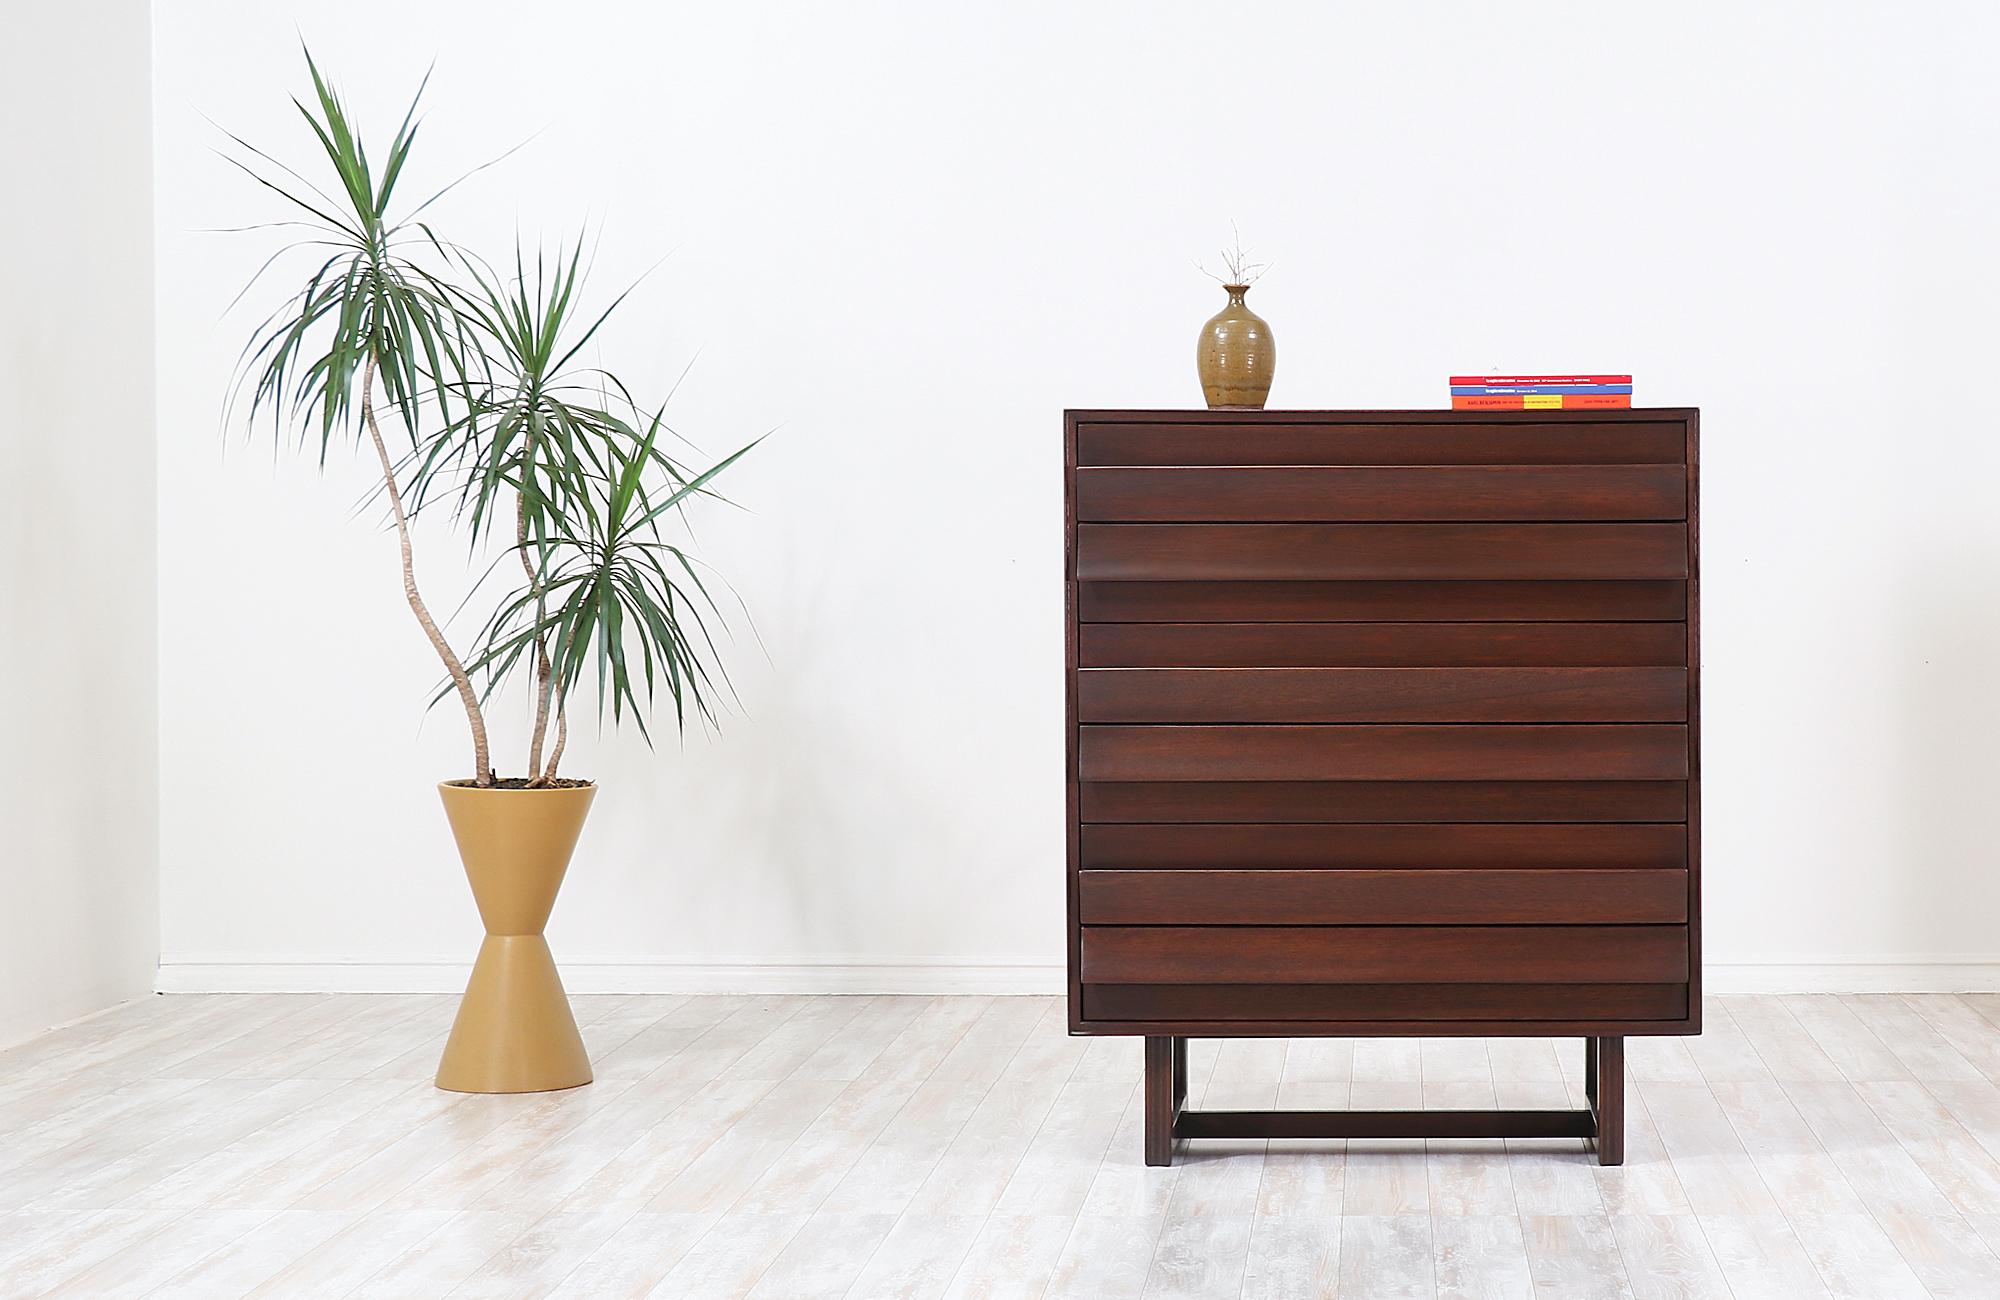 Stunning chest of drawers designed by Paul Laszlo for brown Saltman and manufactured in the United States, circa 1950s. This graceful chest design features a dark walnut-stained mahogany frame with a geometric base. The unique sculpted fin-like